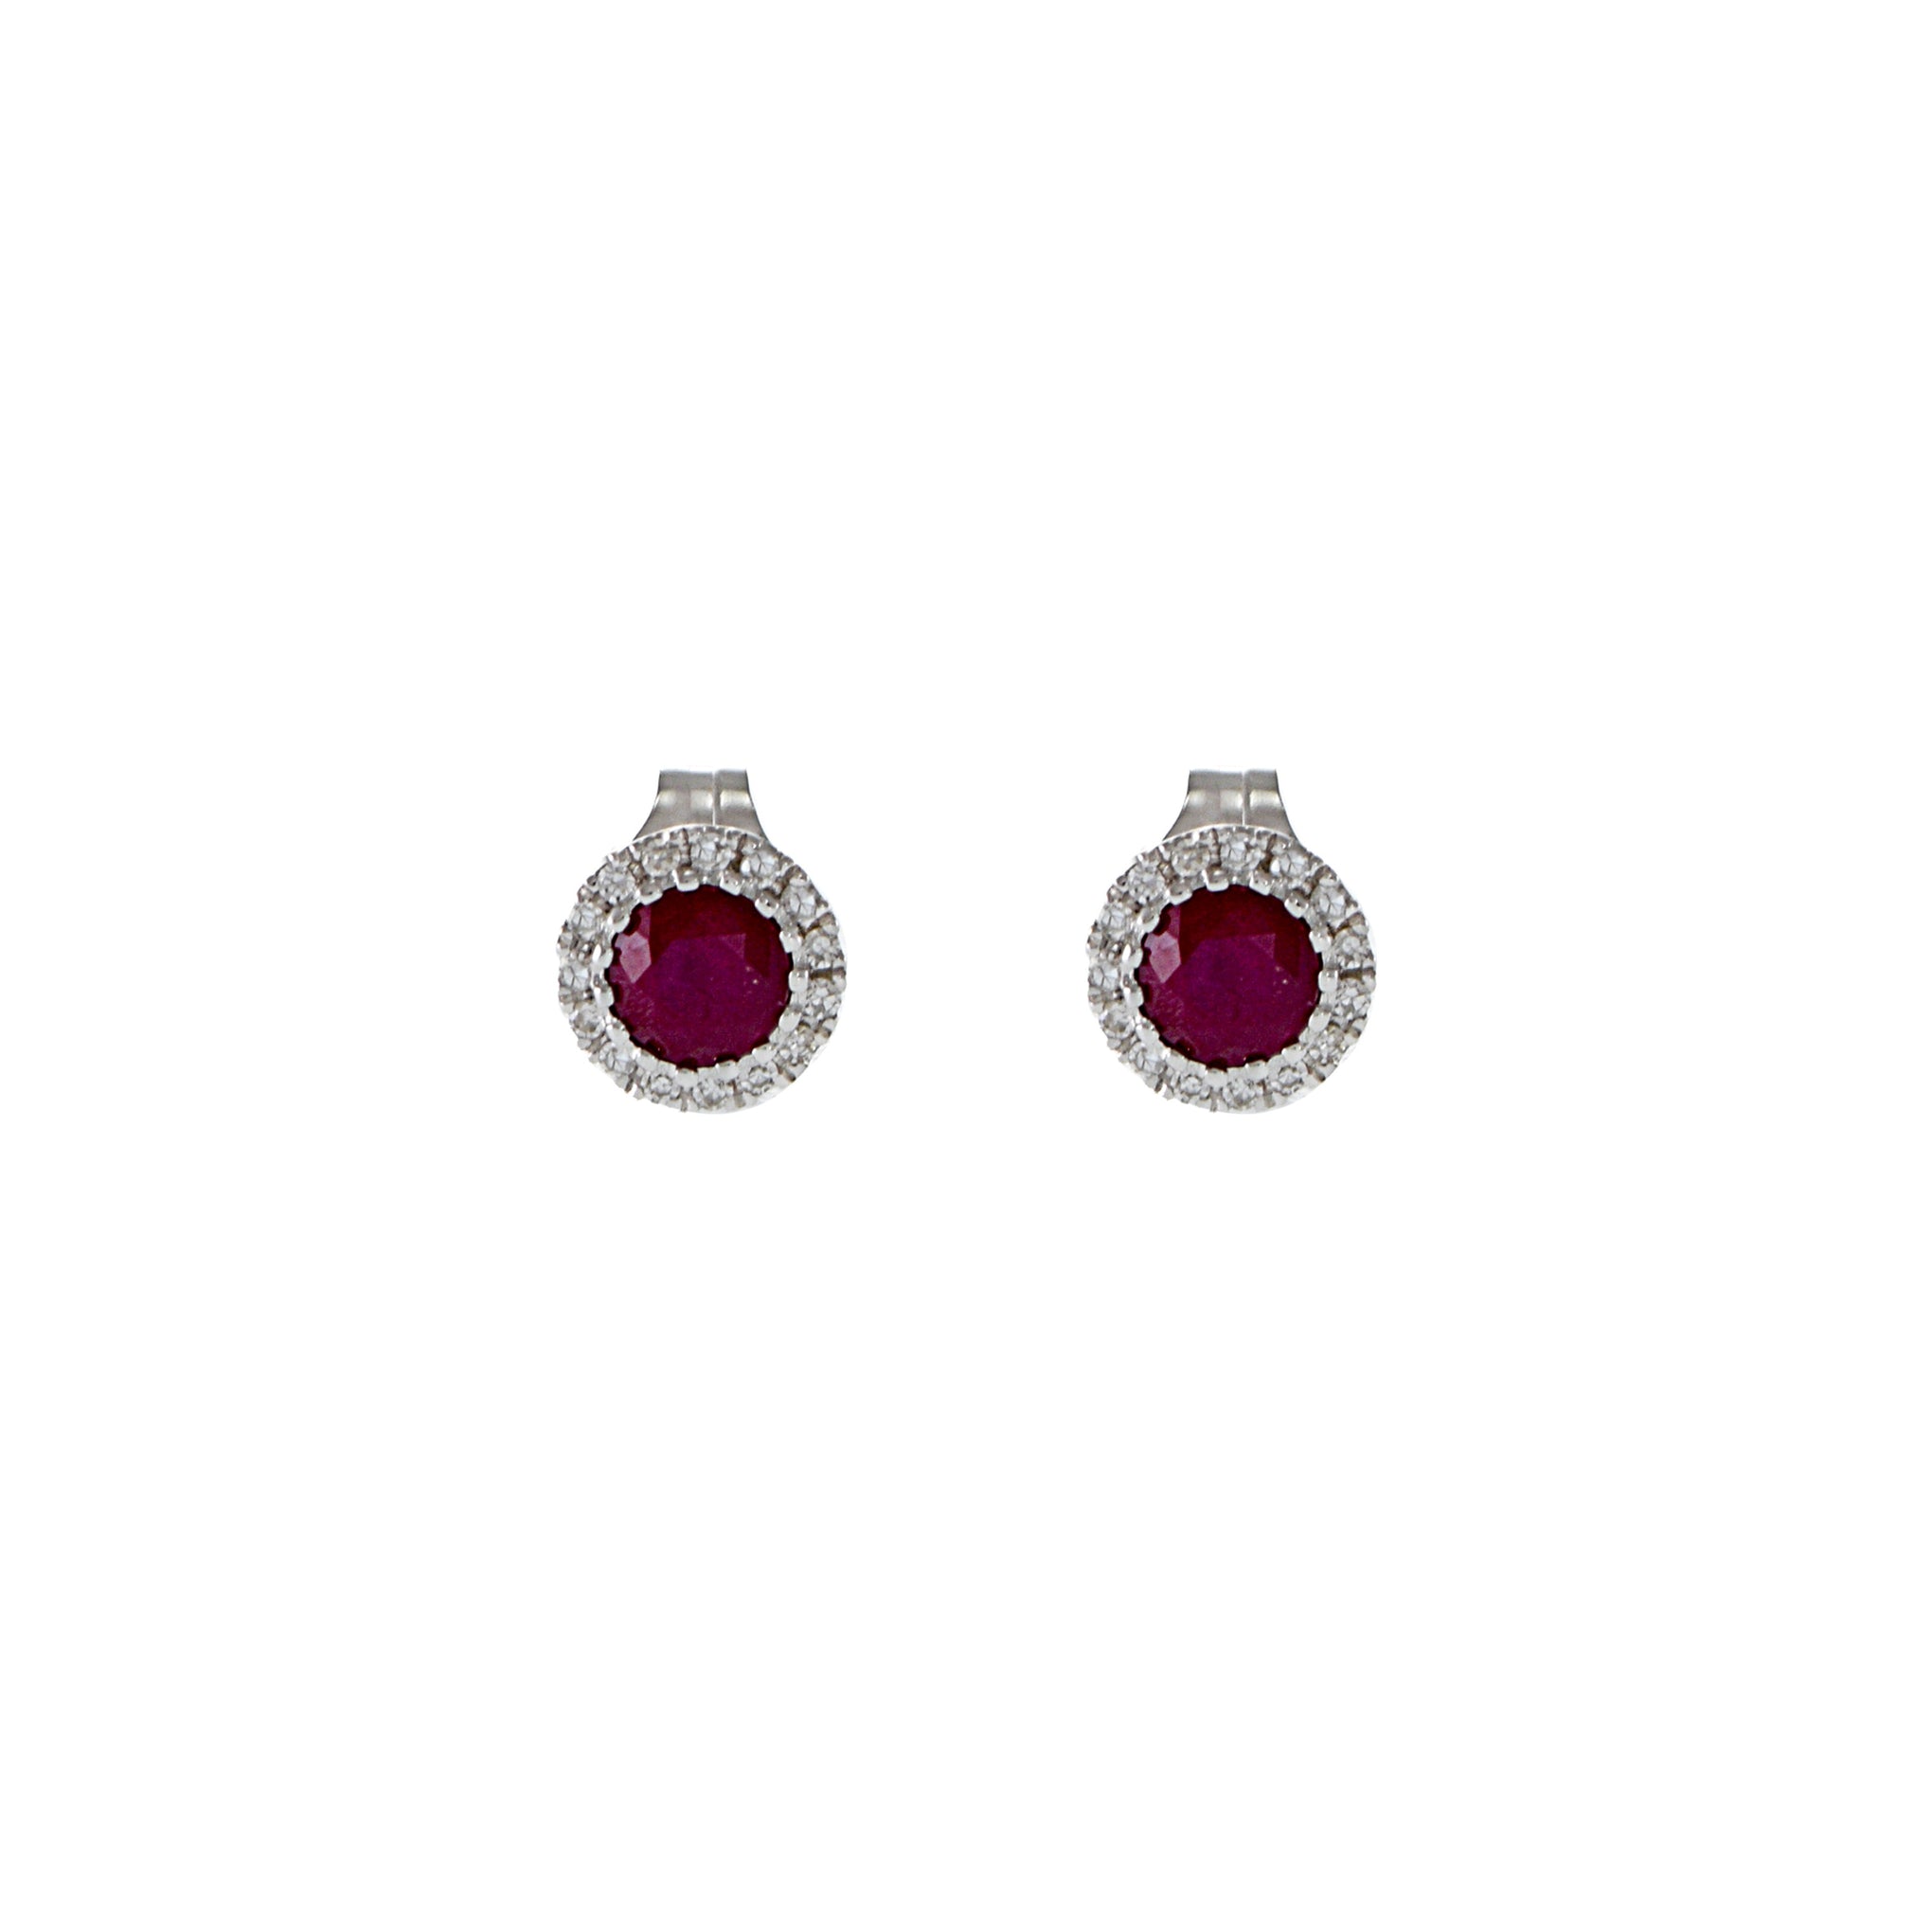 14KT White Gold Halo Ruby And Diamond Earrings